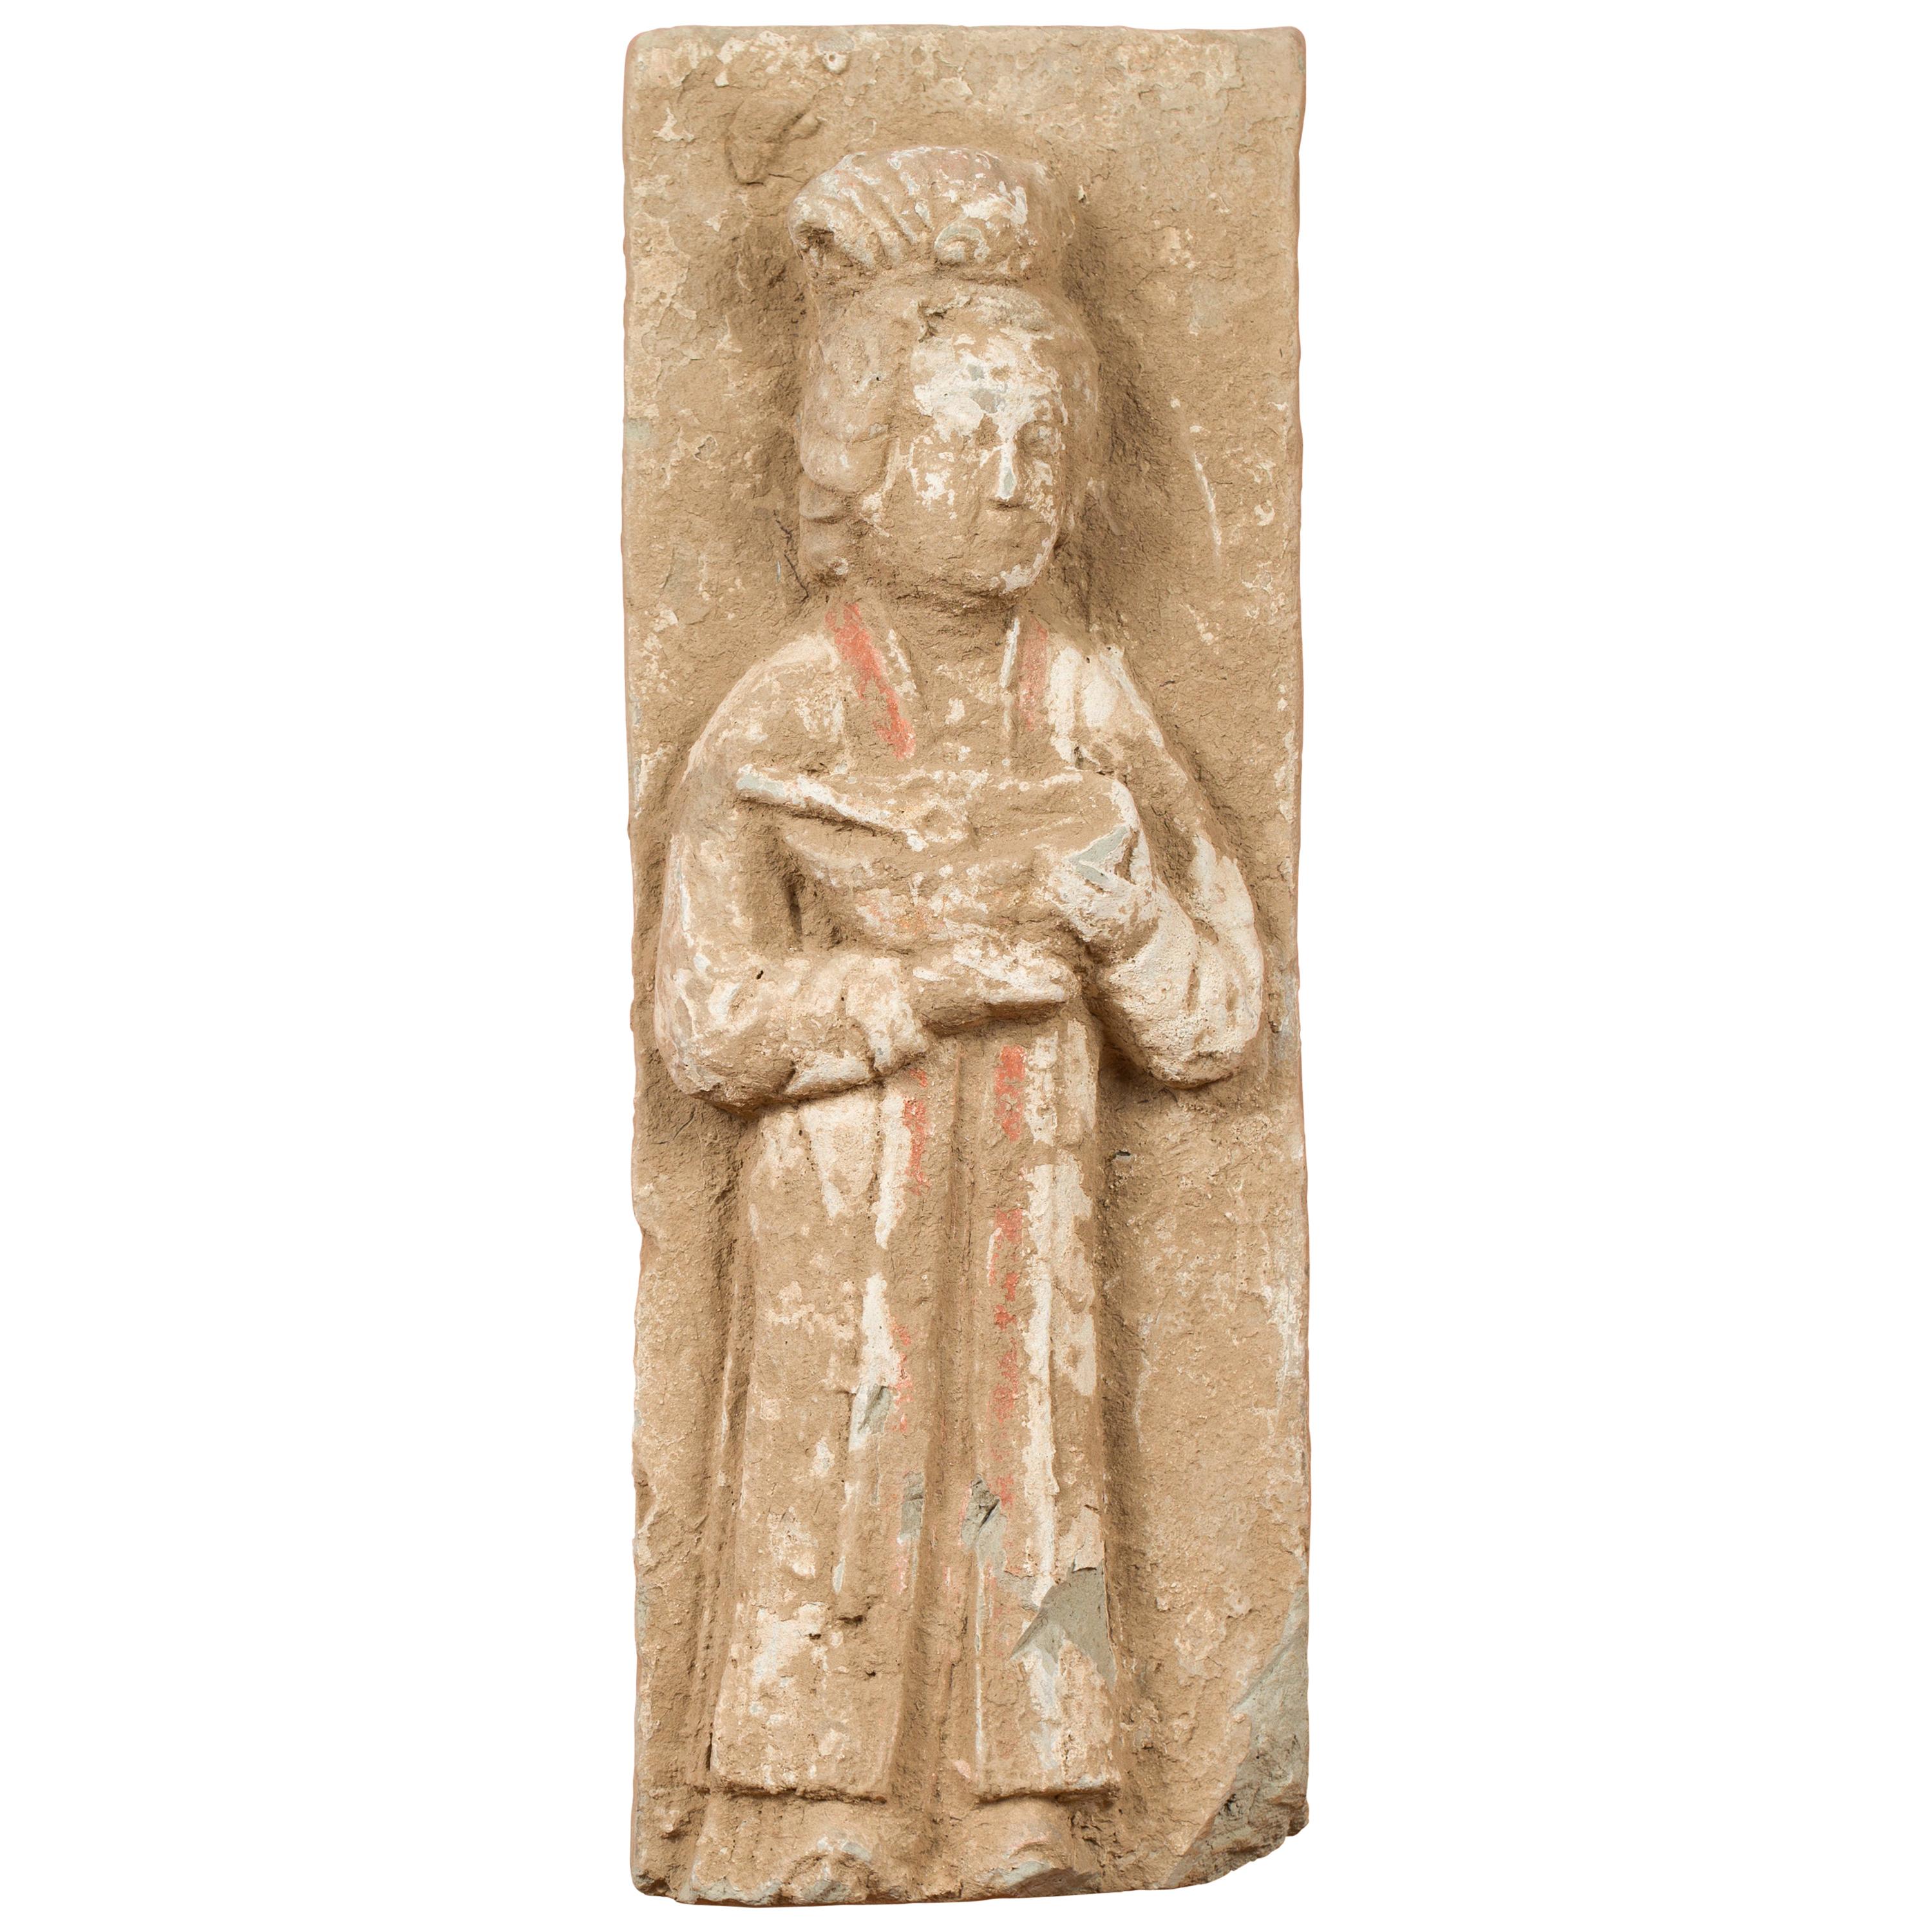 Chinese Han Dynasty Period Wall Plaque Depicting a Woman Carrying a Dish